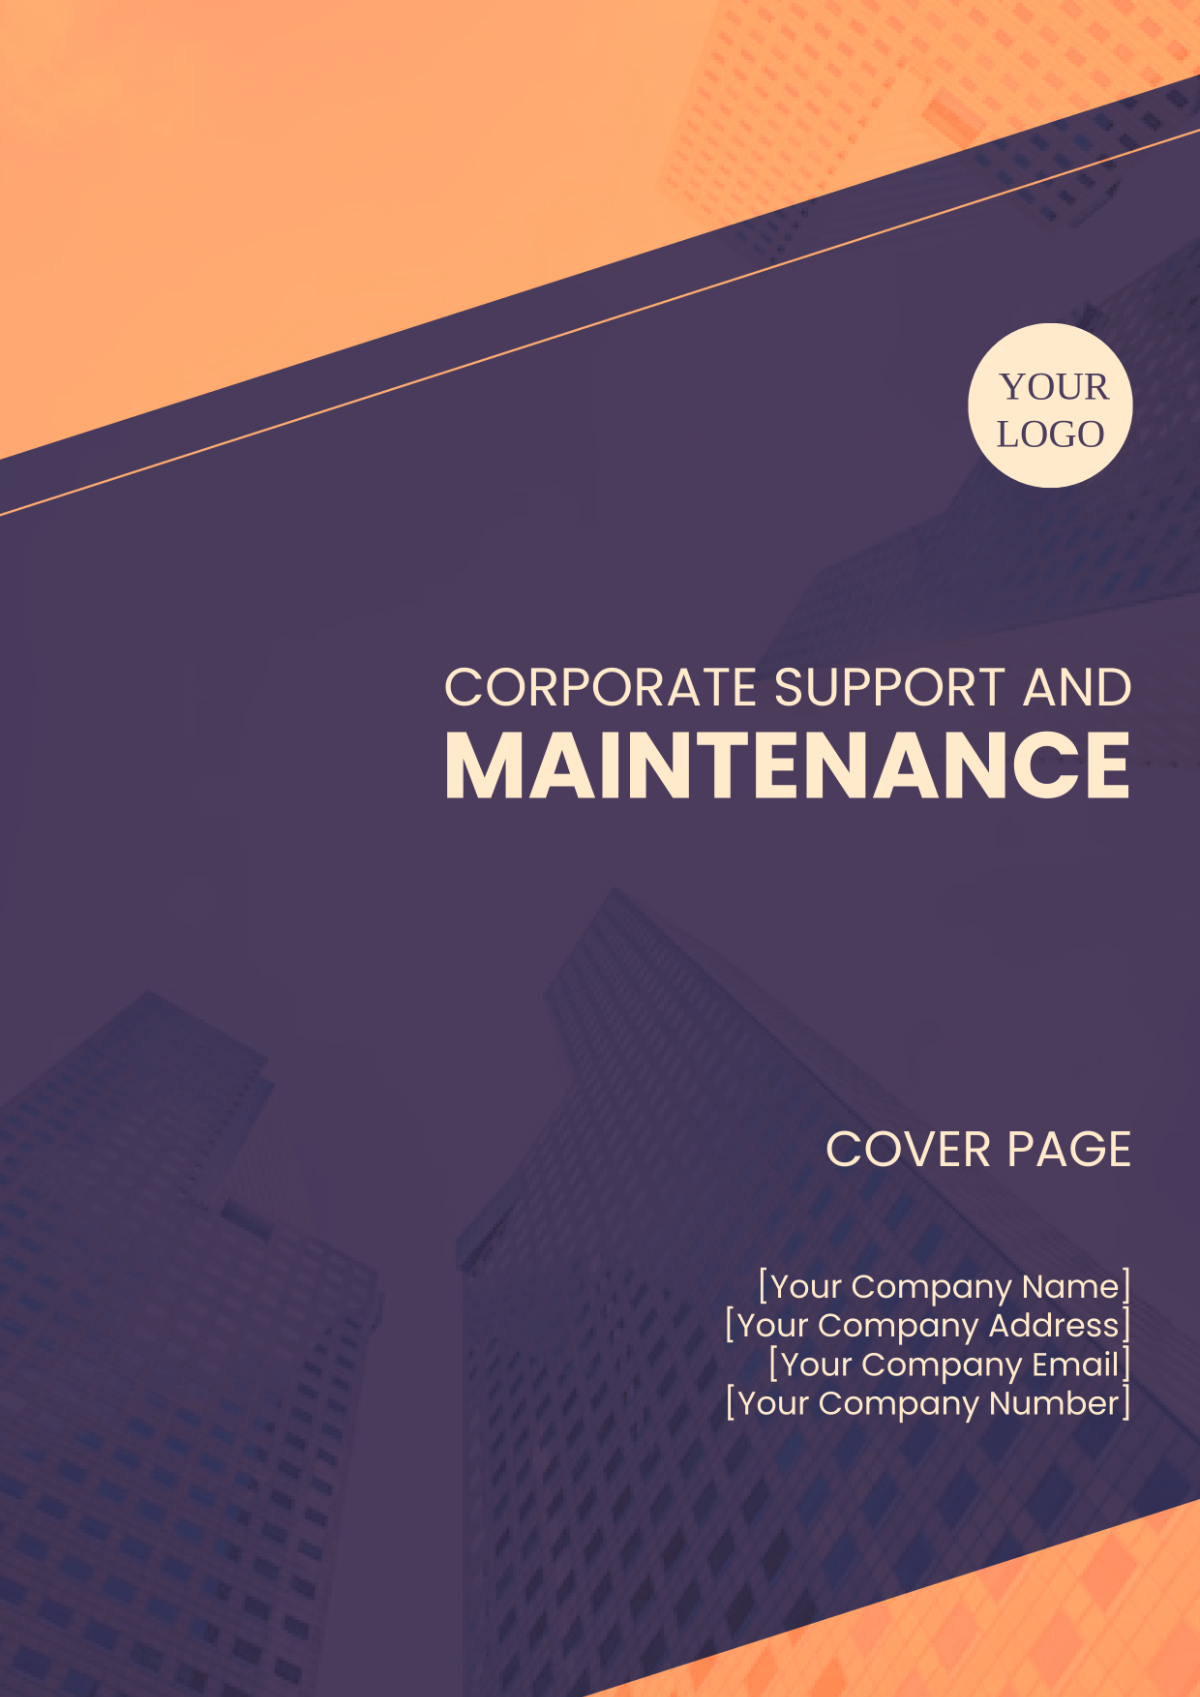 Corporate Support and Maintenance Cover Page